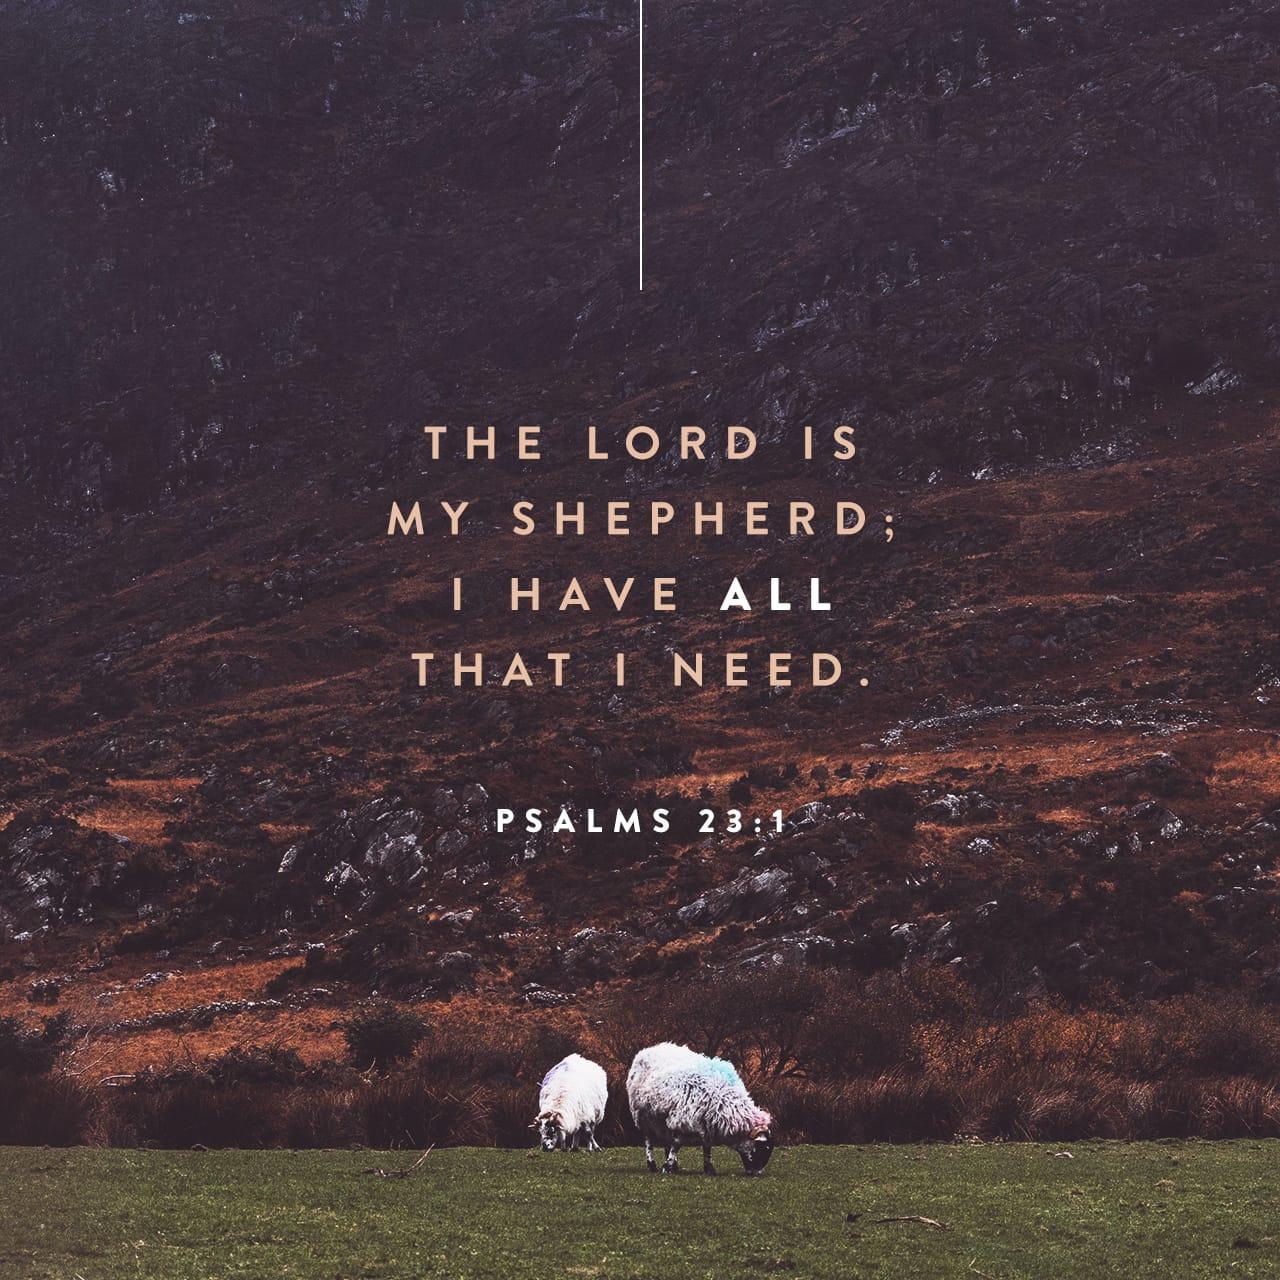 Bible Verse of the Day - day 152 - image 37593 (Psalms 23:1-4)